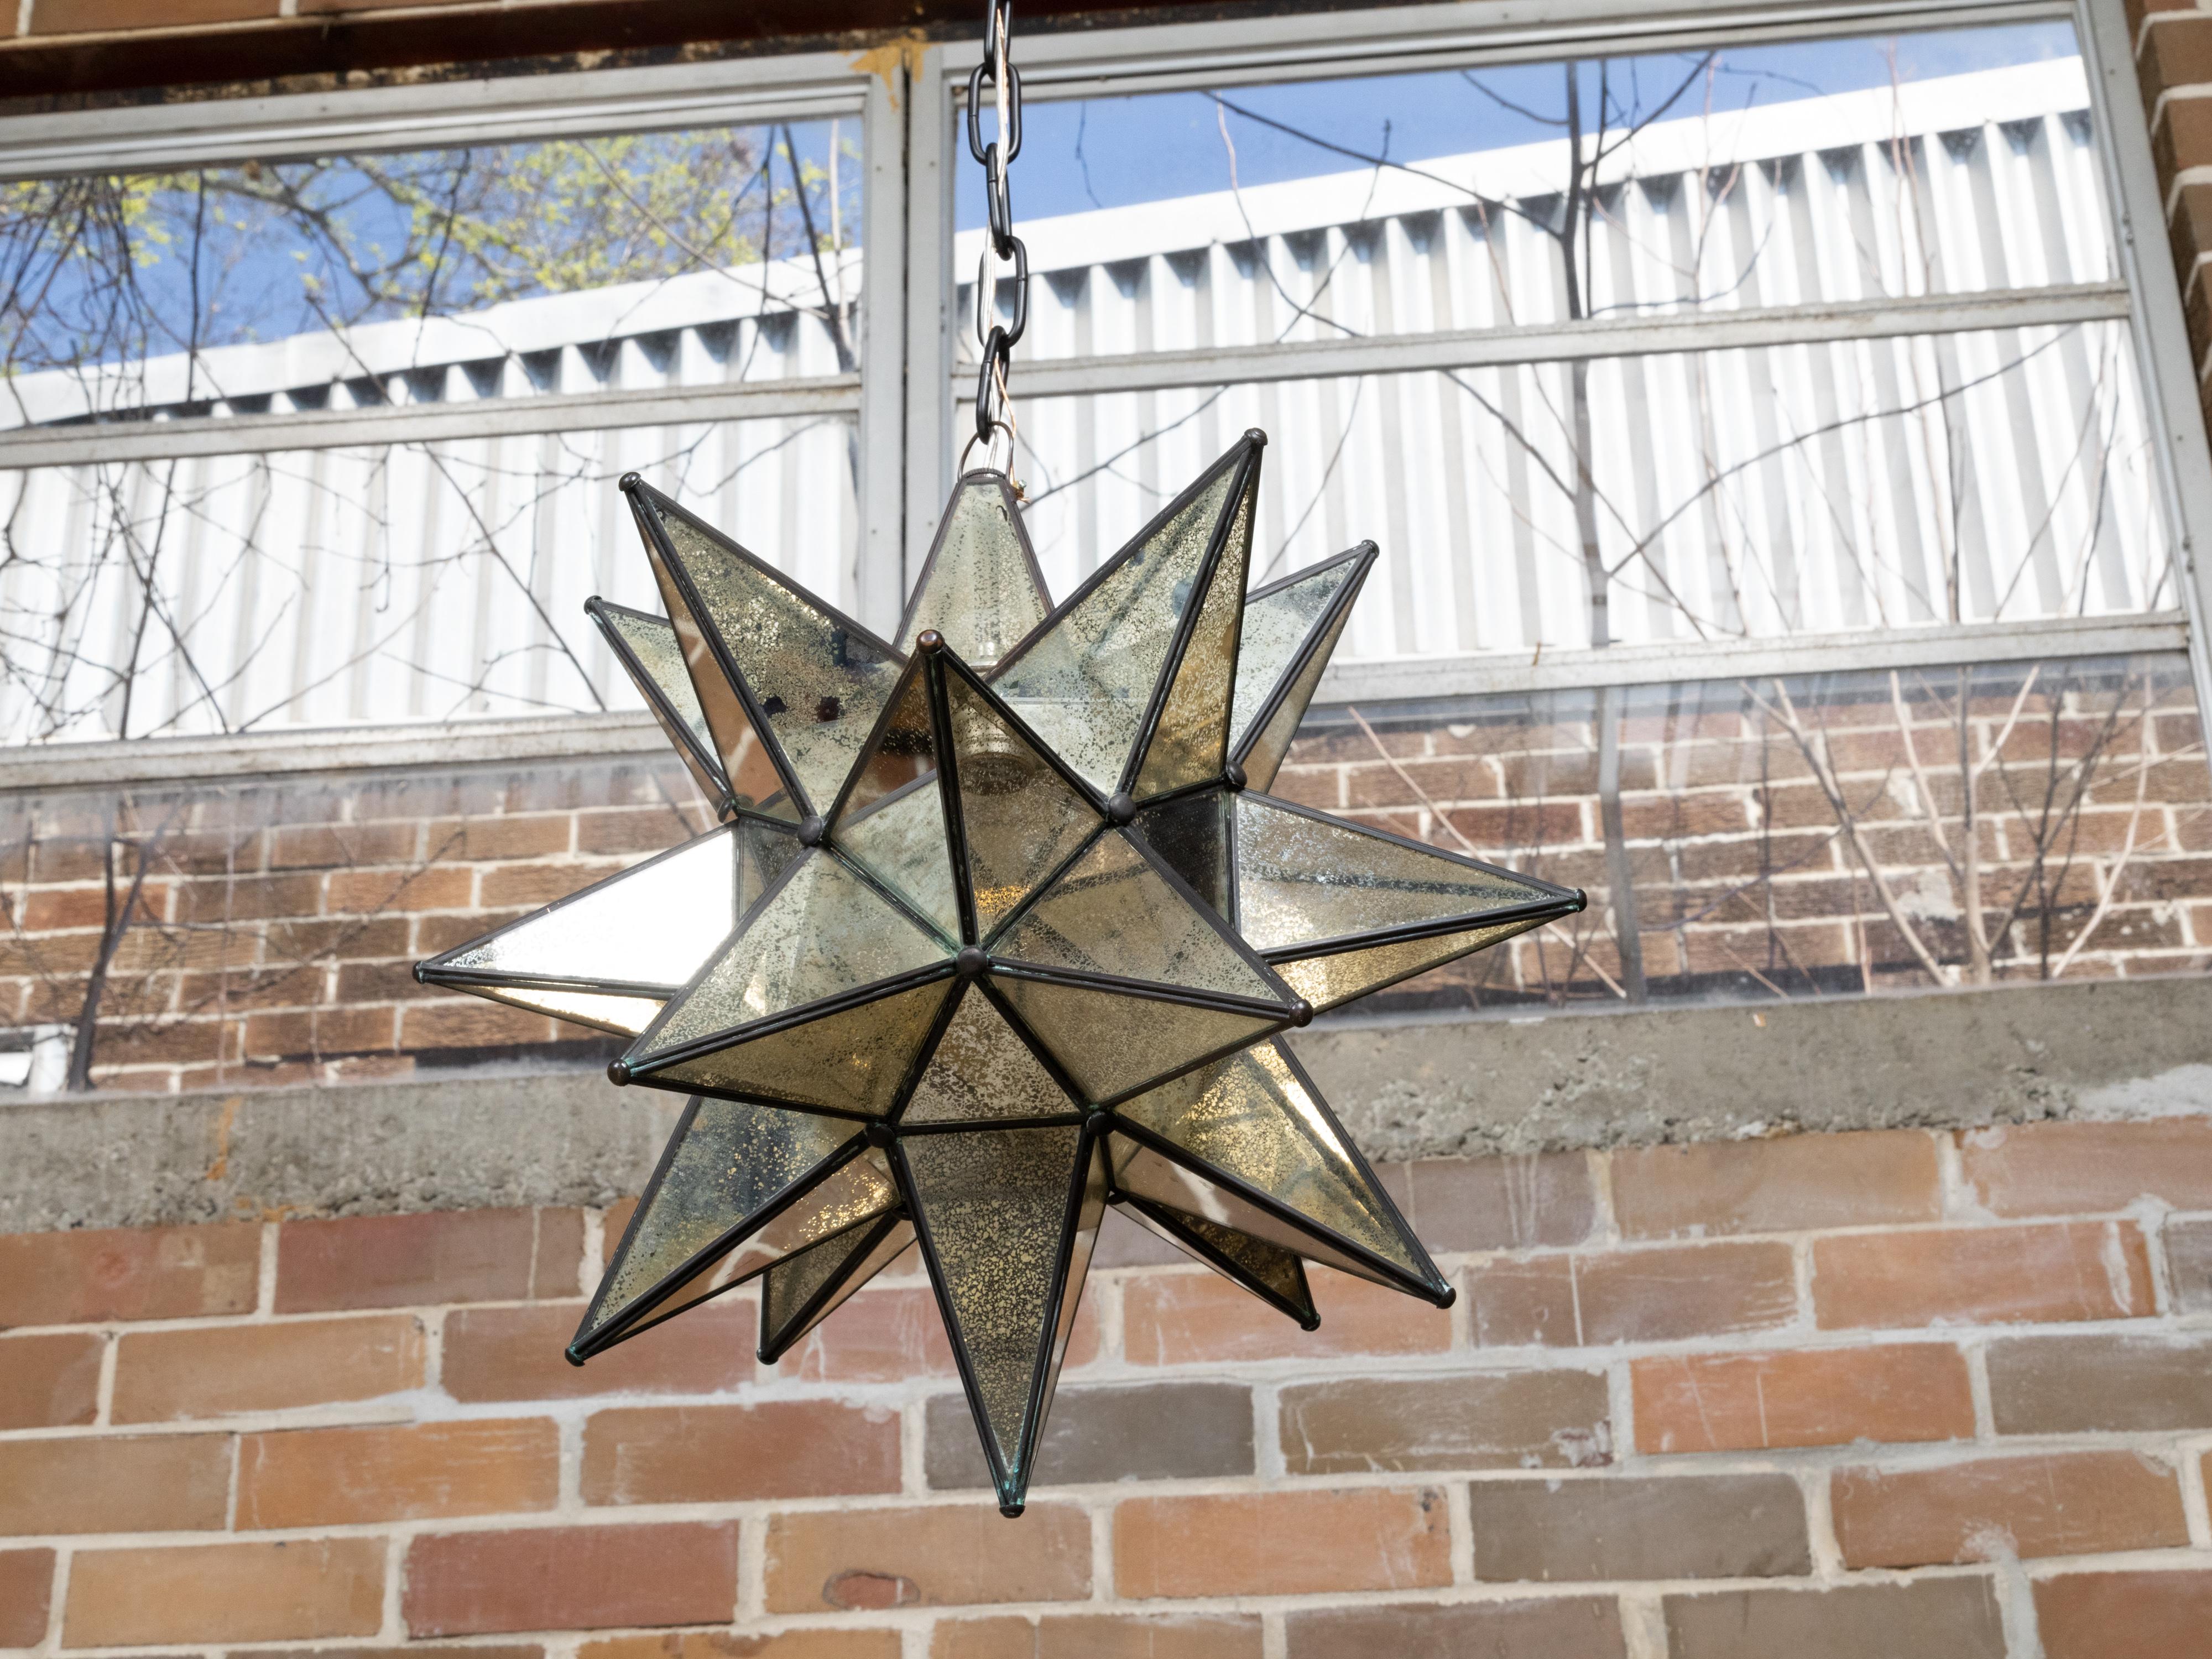 A small French star shaped light fixture from the Midcentury period, with antiqued mirrored panels and single socket. This French Midcentury star-shaped light fixture brings a celestial touch to any interior with its antiqued mirrored panels and